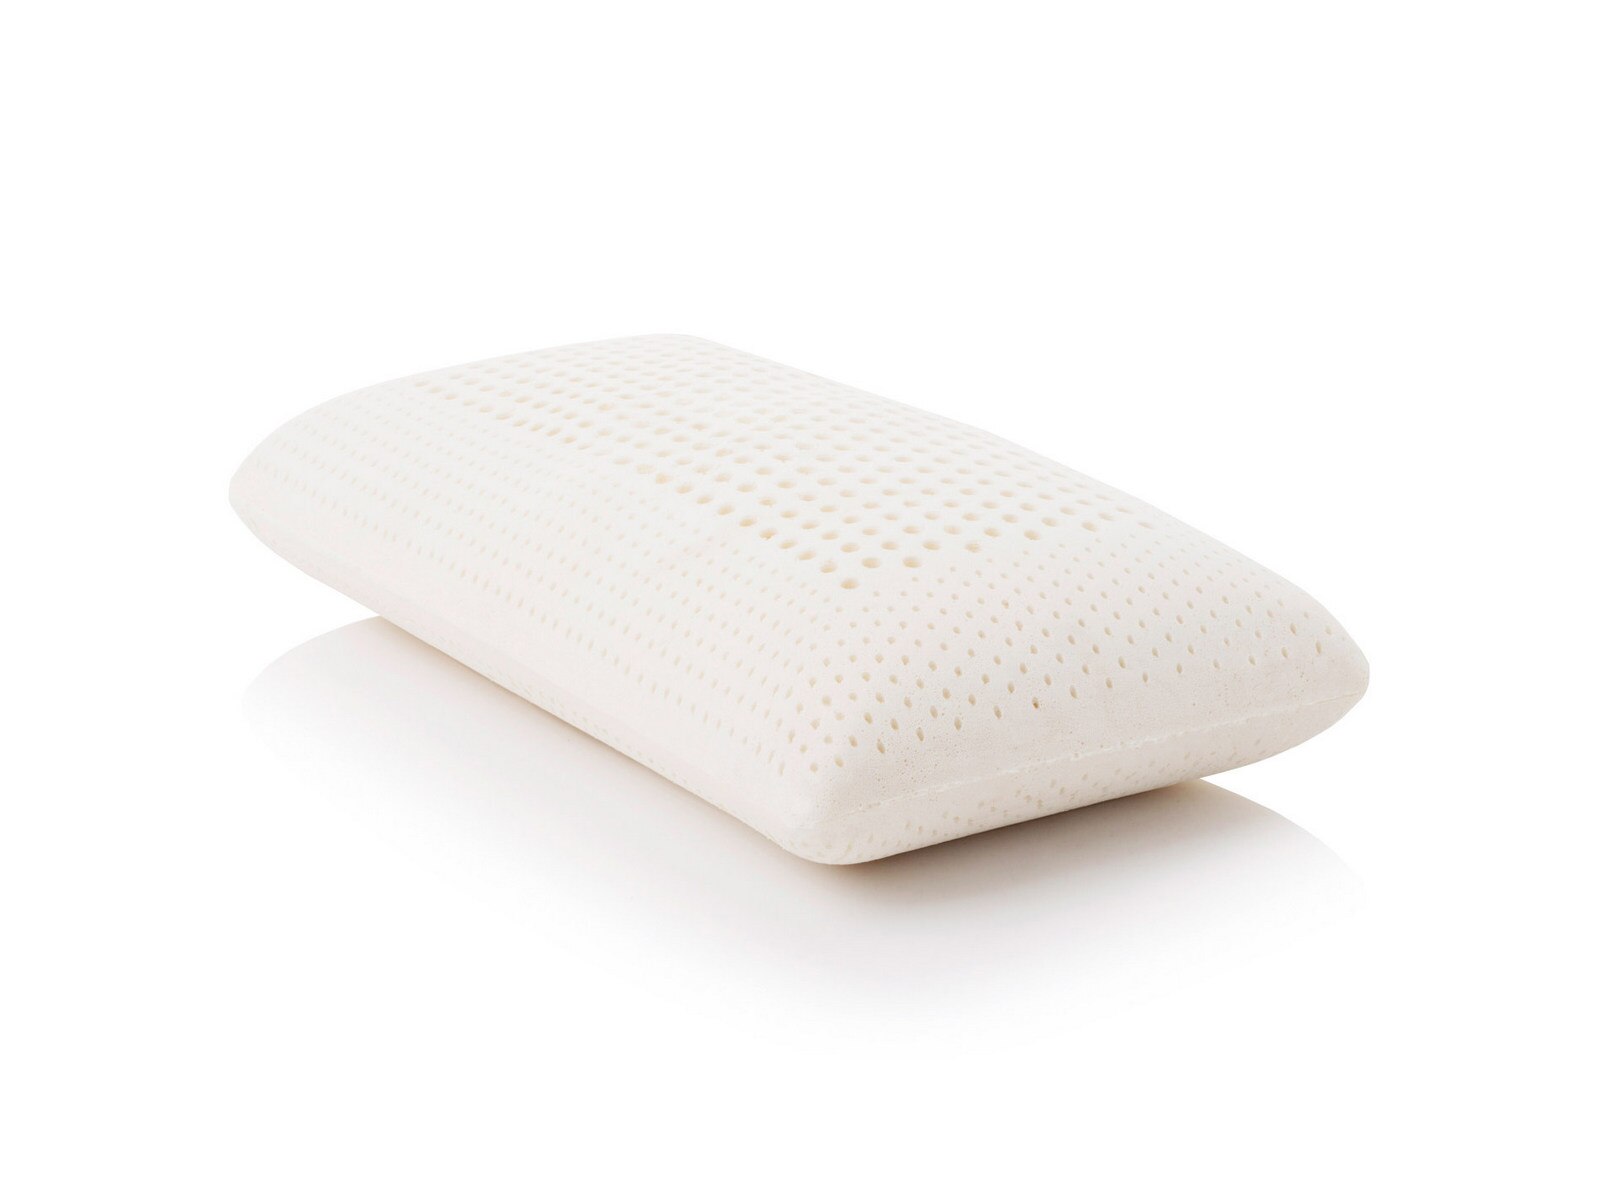 Zoned Talalay Latex Firm Pillow